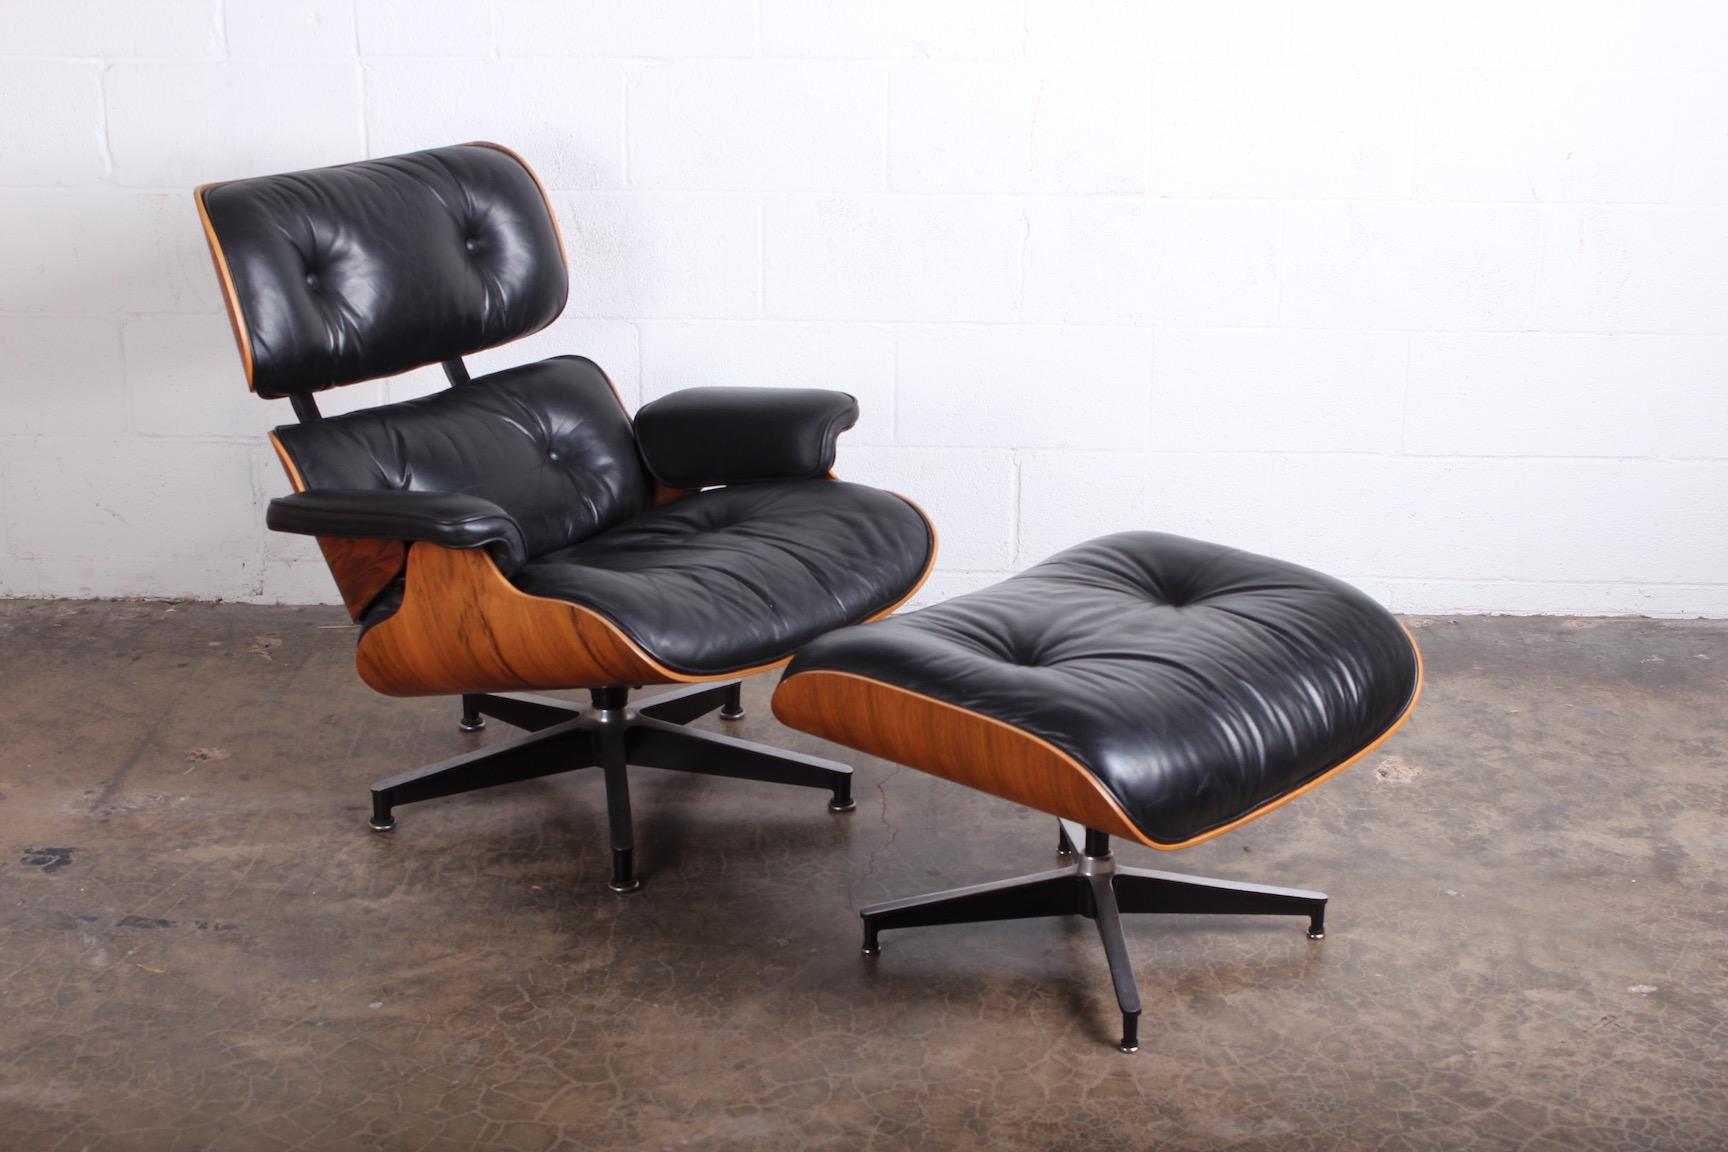 A rosewood 670/671 lounge chair and ottoman by Charles Eames for Herman Miller.